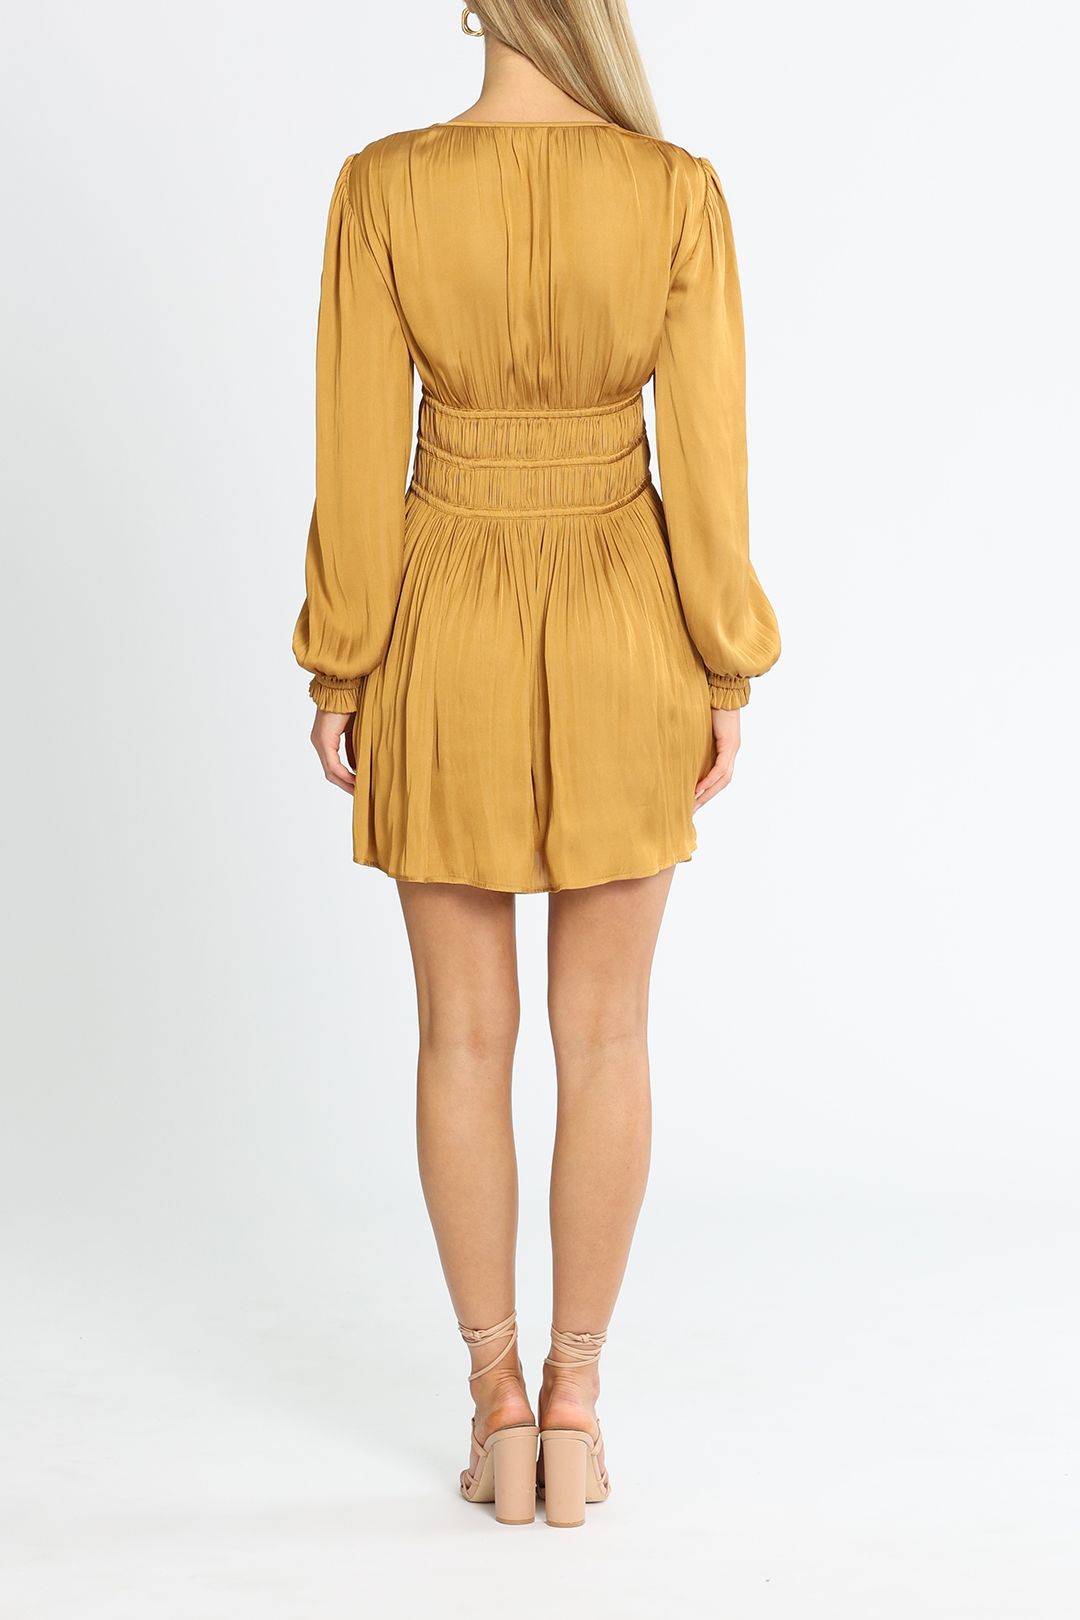 Belle and Bloom Shine Bright Ruched Dress Mustard Long Sleeves